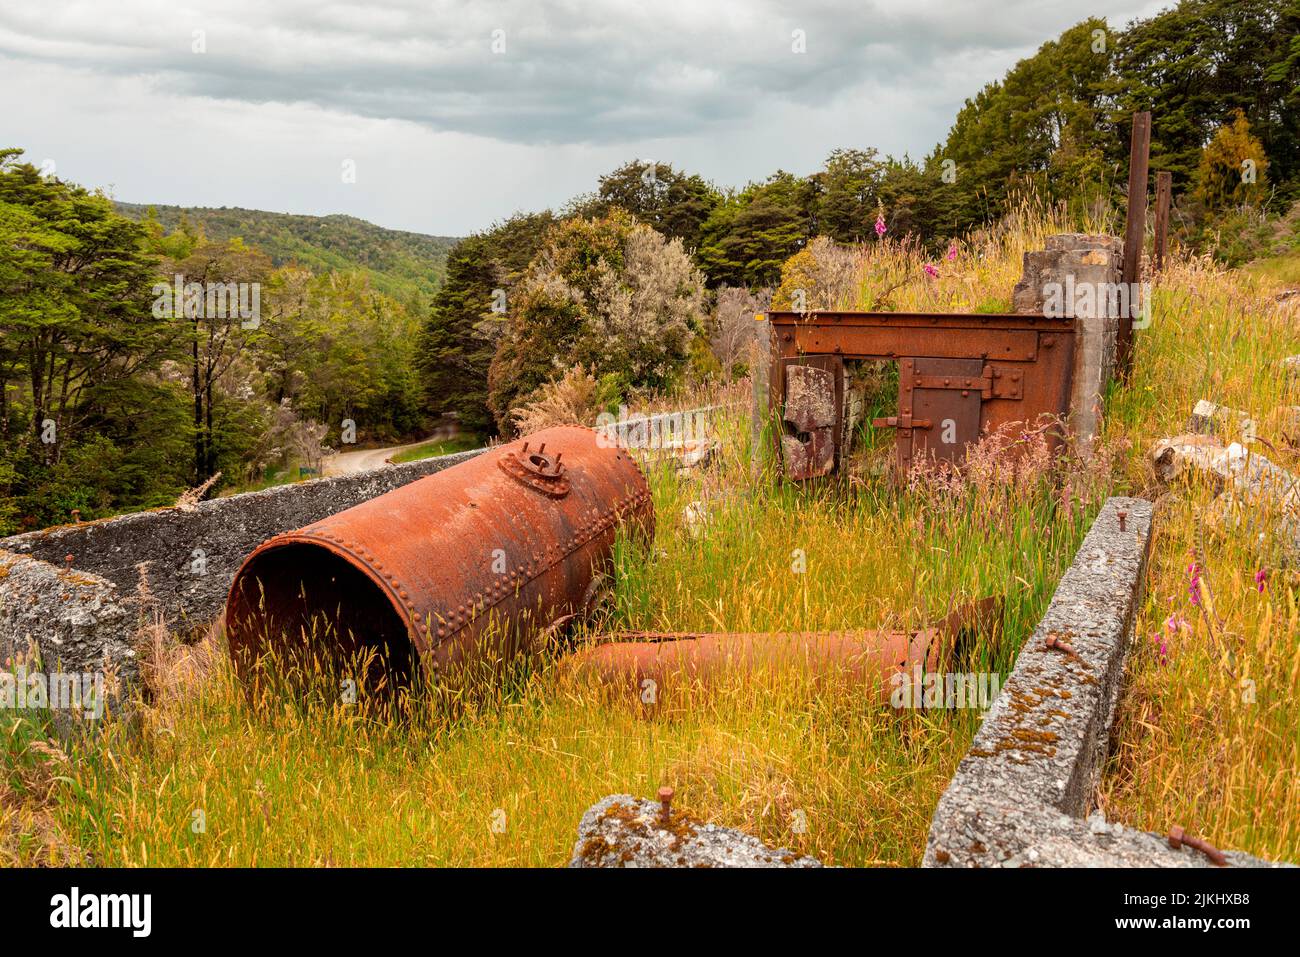 Remains in the landscape of an old mining factory in the ghost town of Waiuta, South Island of New Zealand Stock Photo